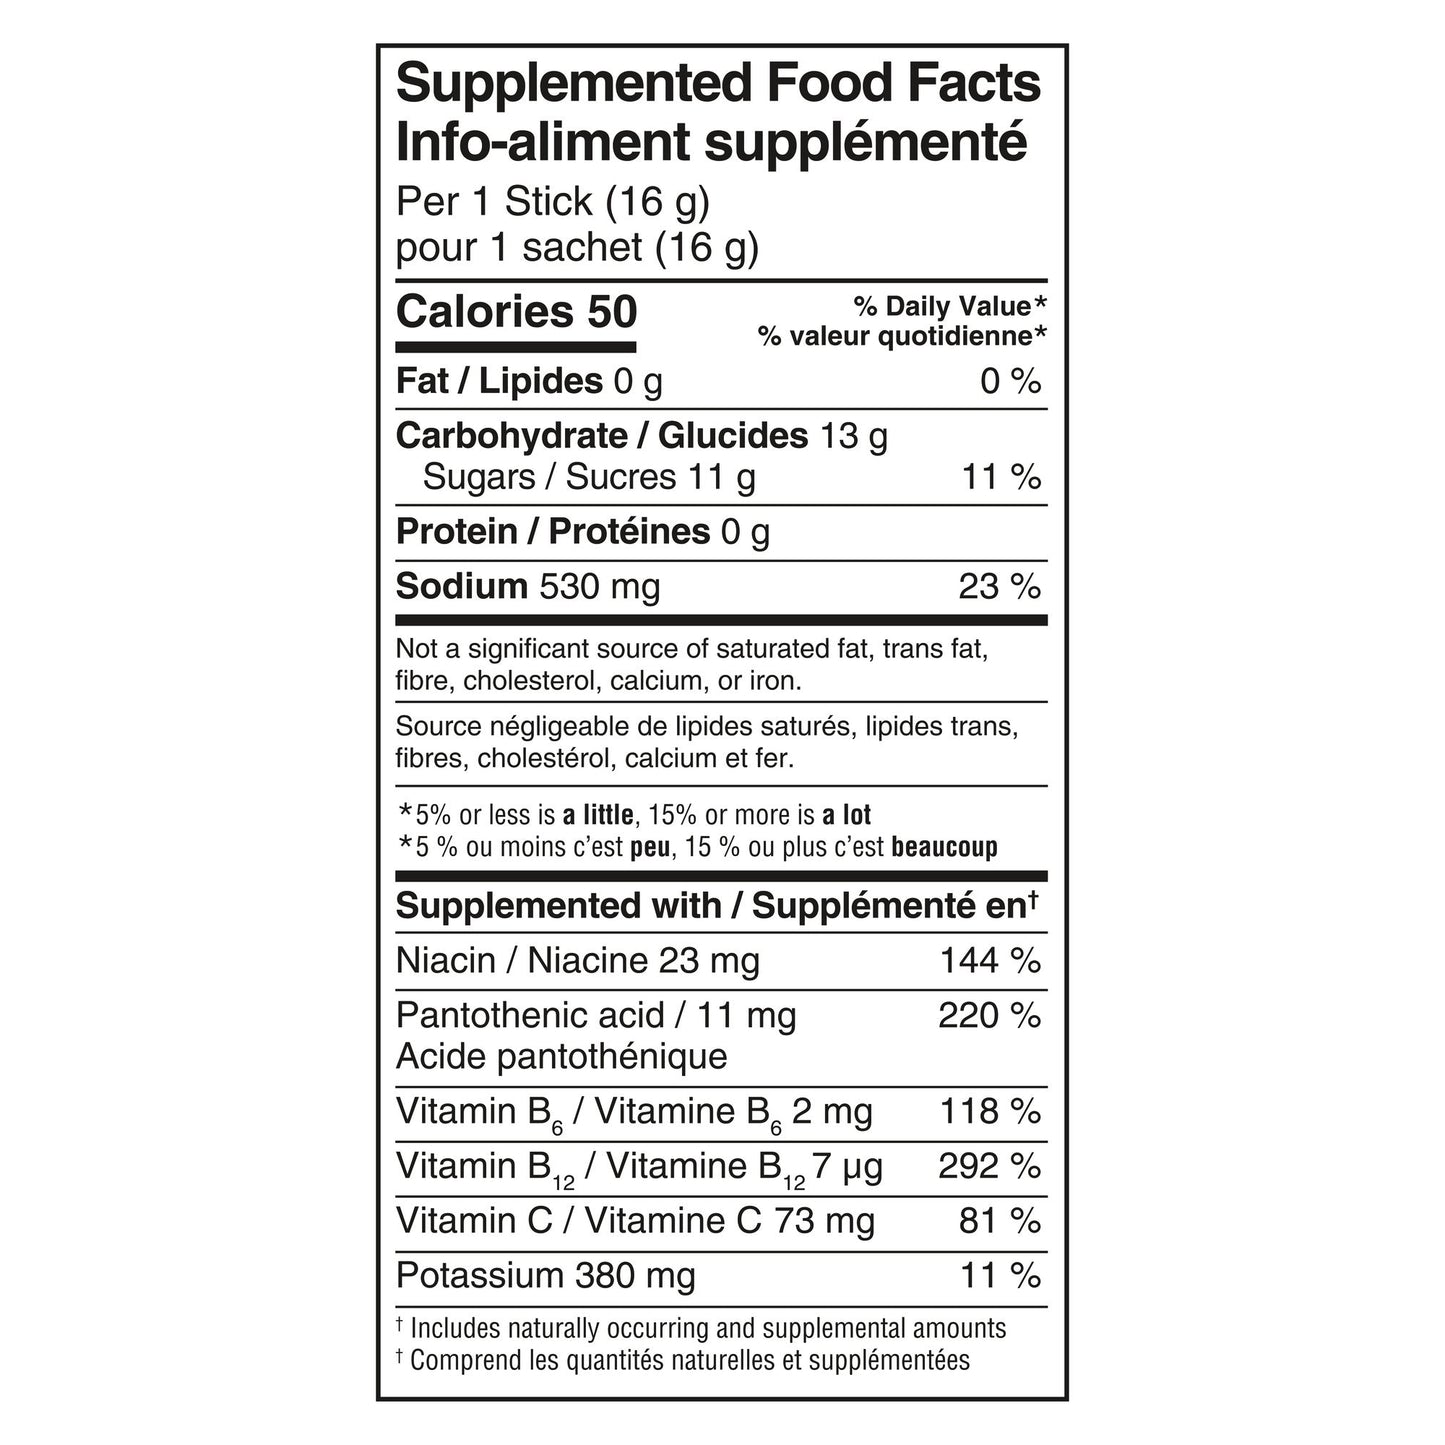 Showing the Supplemented Food Facts label as it appears on the Liquid I.V Hydration Multiplier Strawberry product packaging.